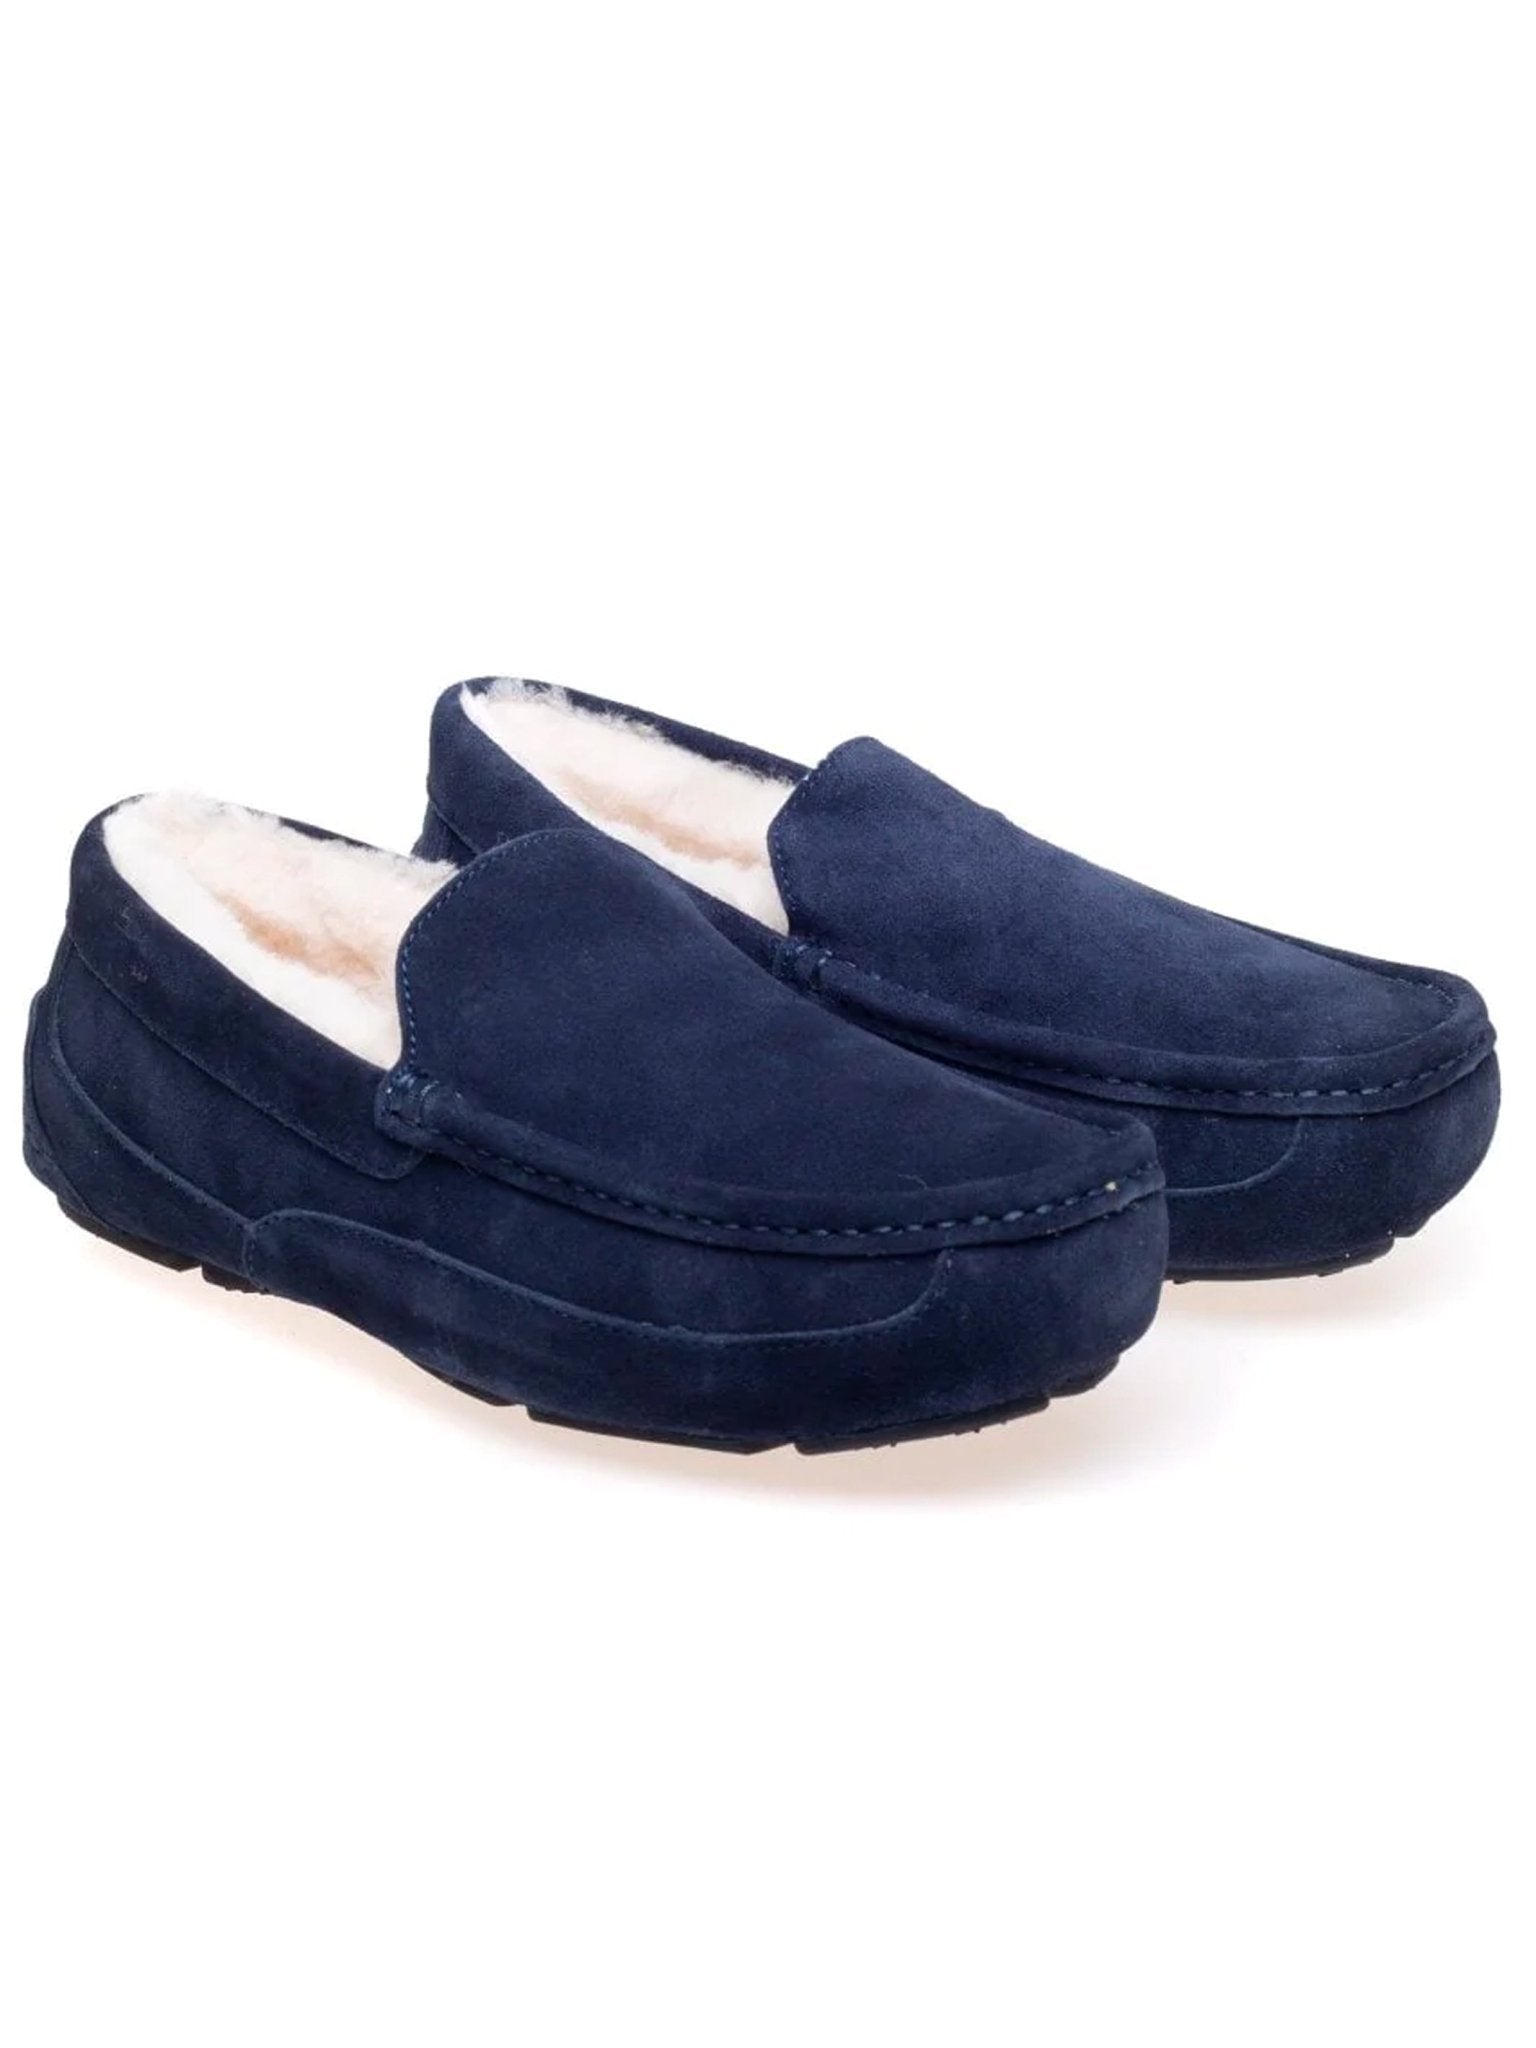 Steptronic Steptronic - Marlow Leather / Suede Mens Slippers & House shoes Slippers